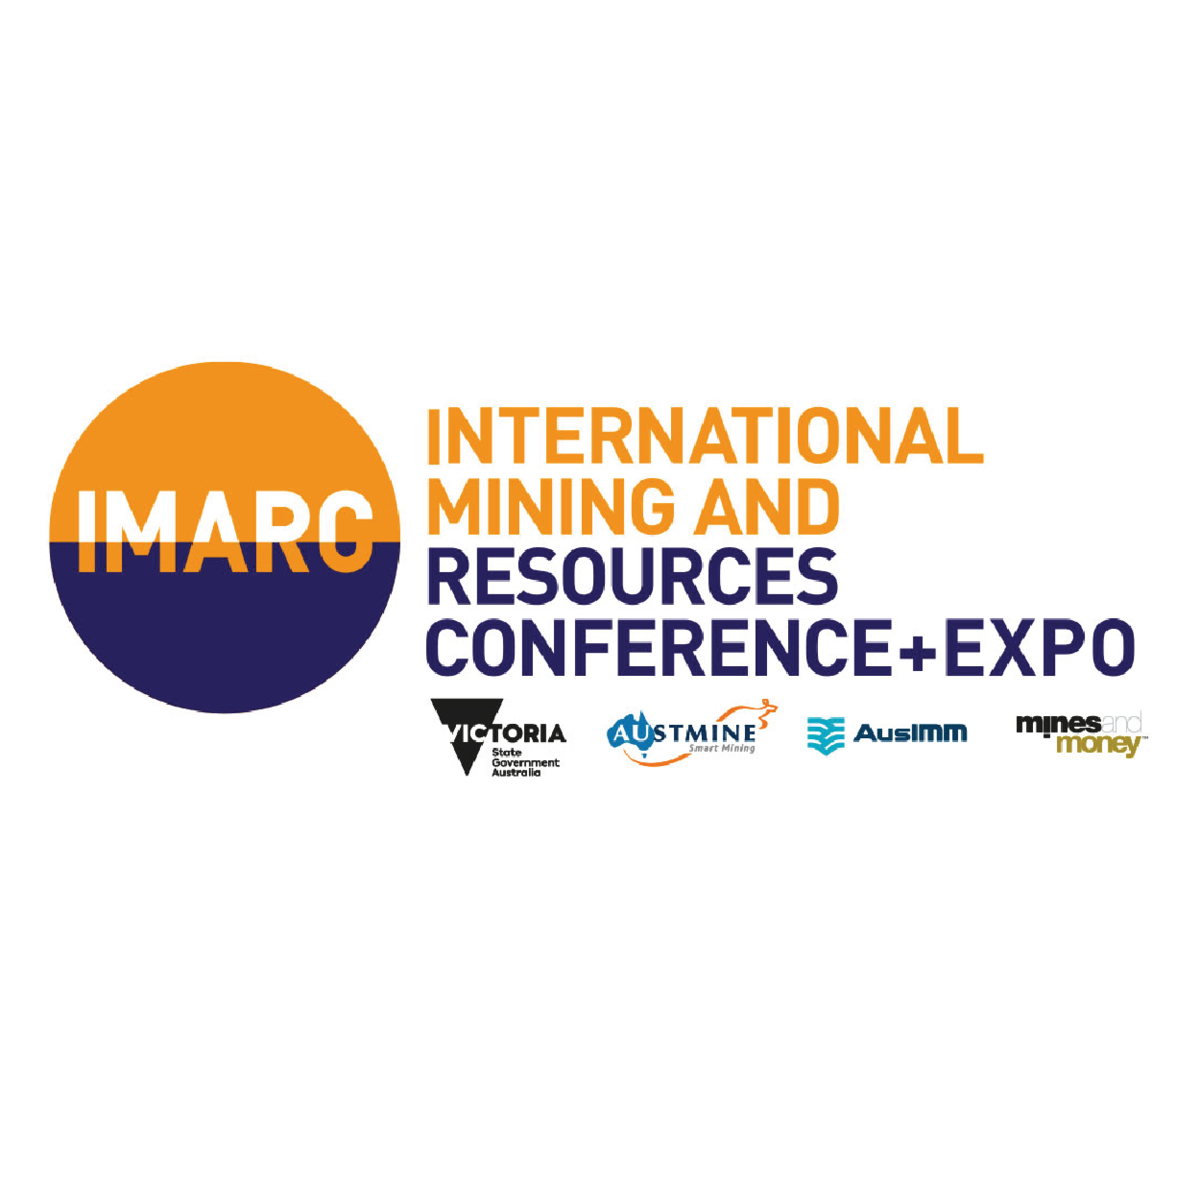 International Mining and Resources Conference + Expo